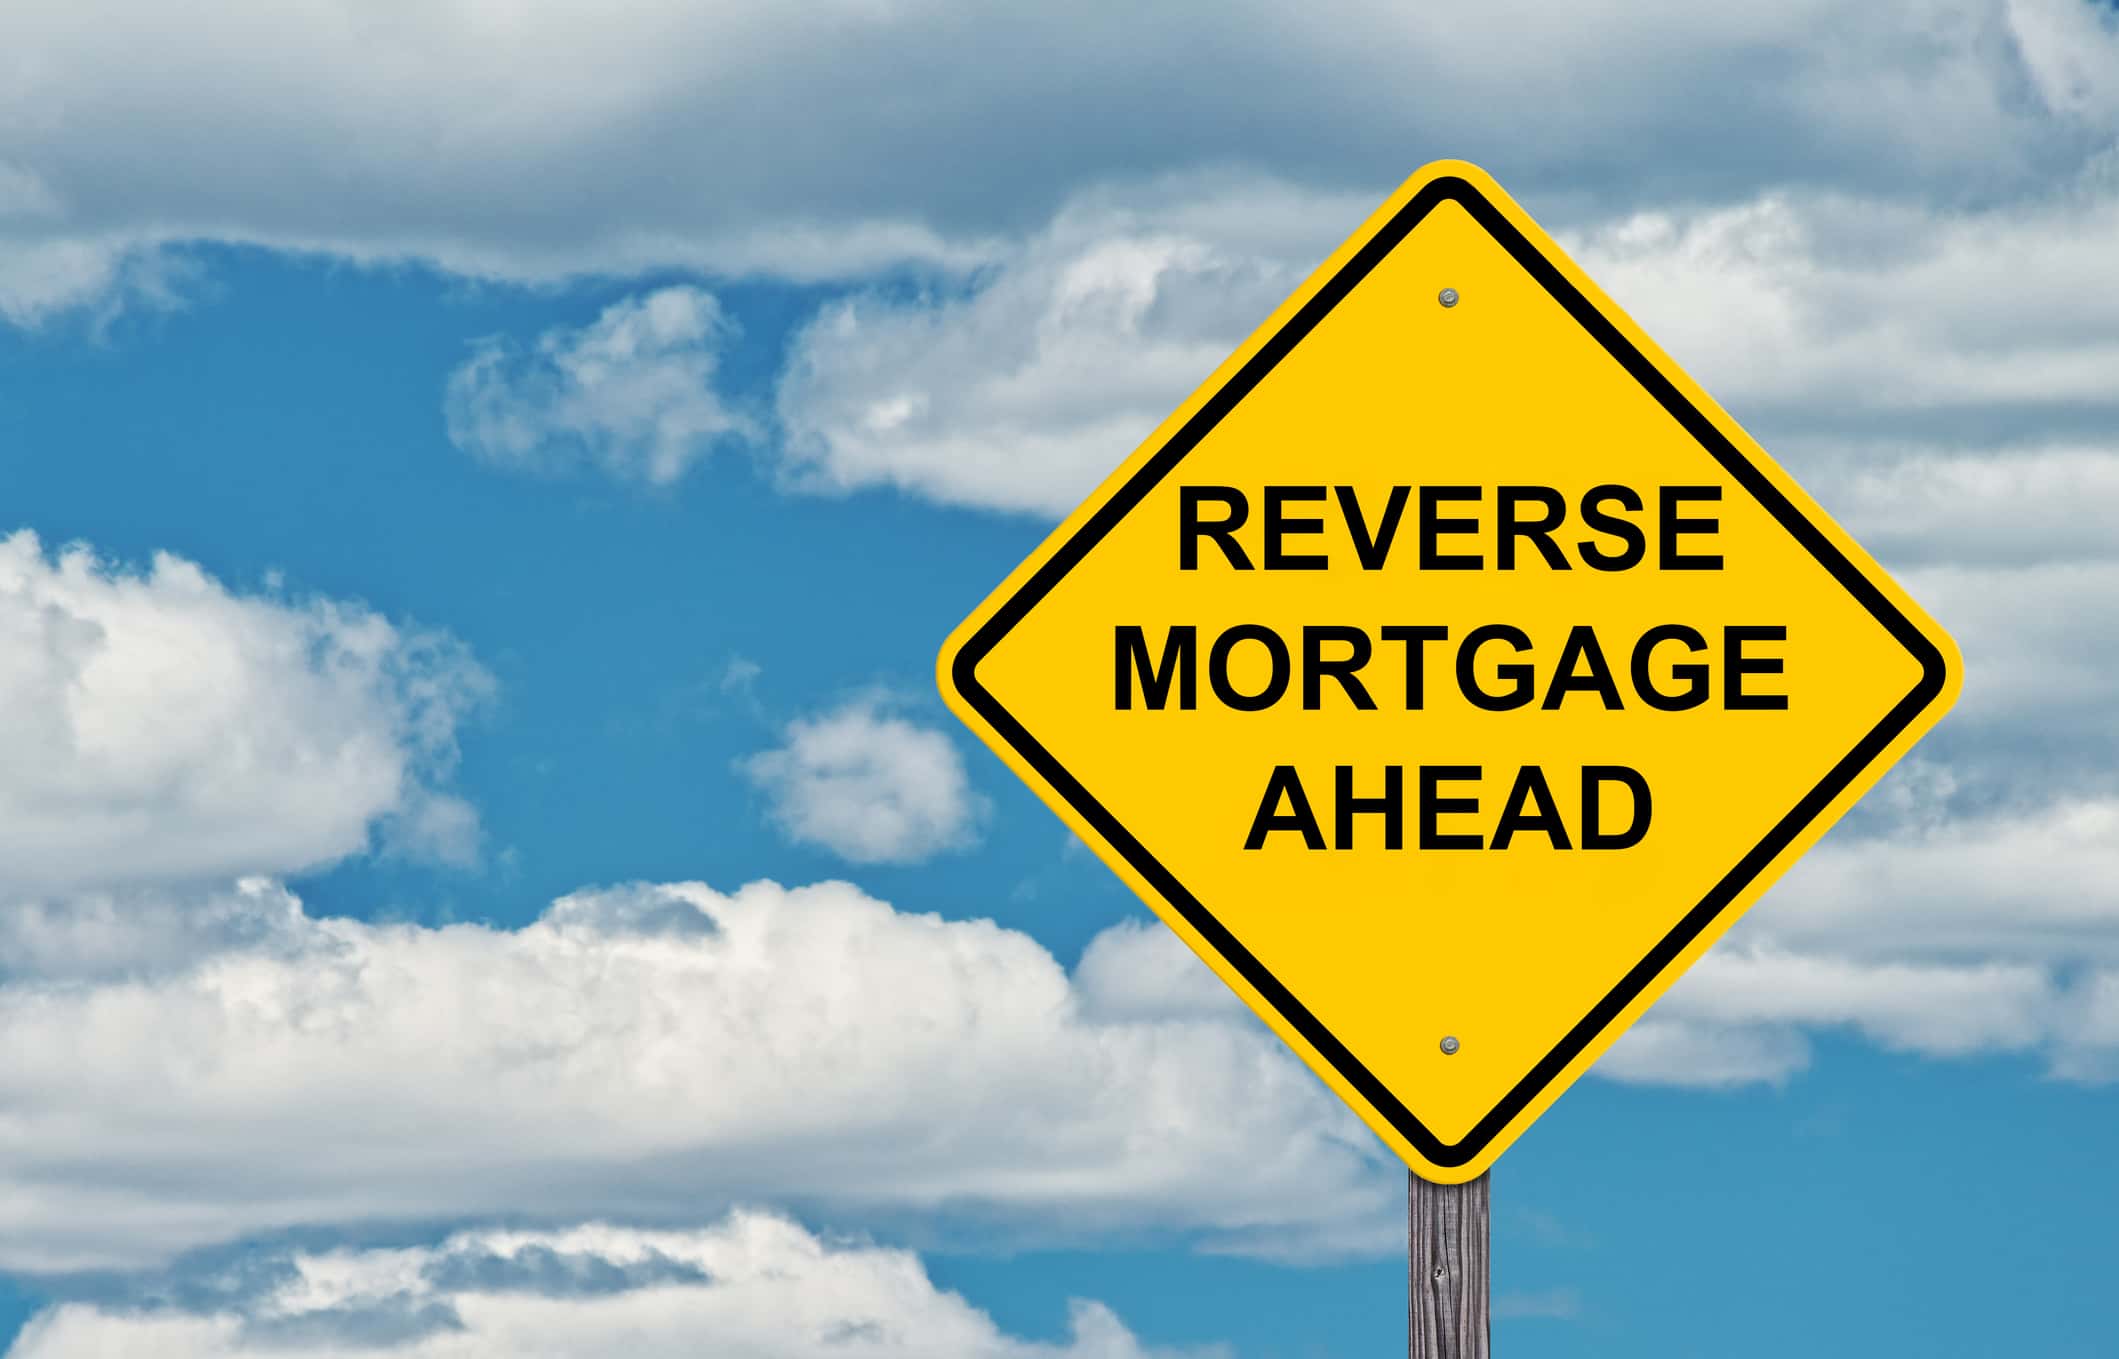 reverse-mortgage-ahead-caution-sign